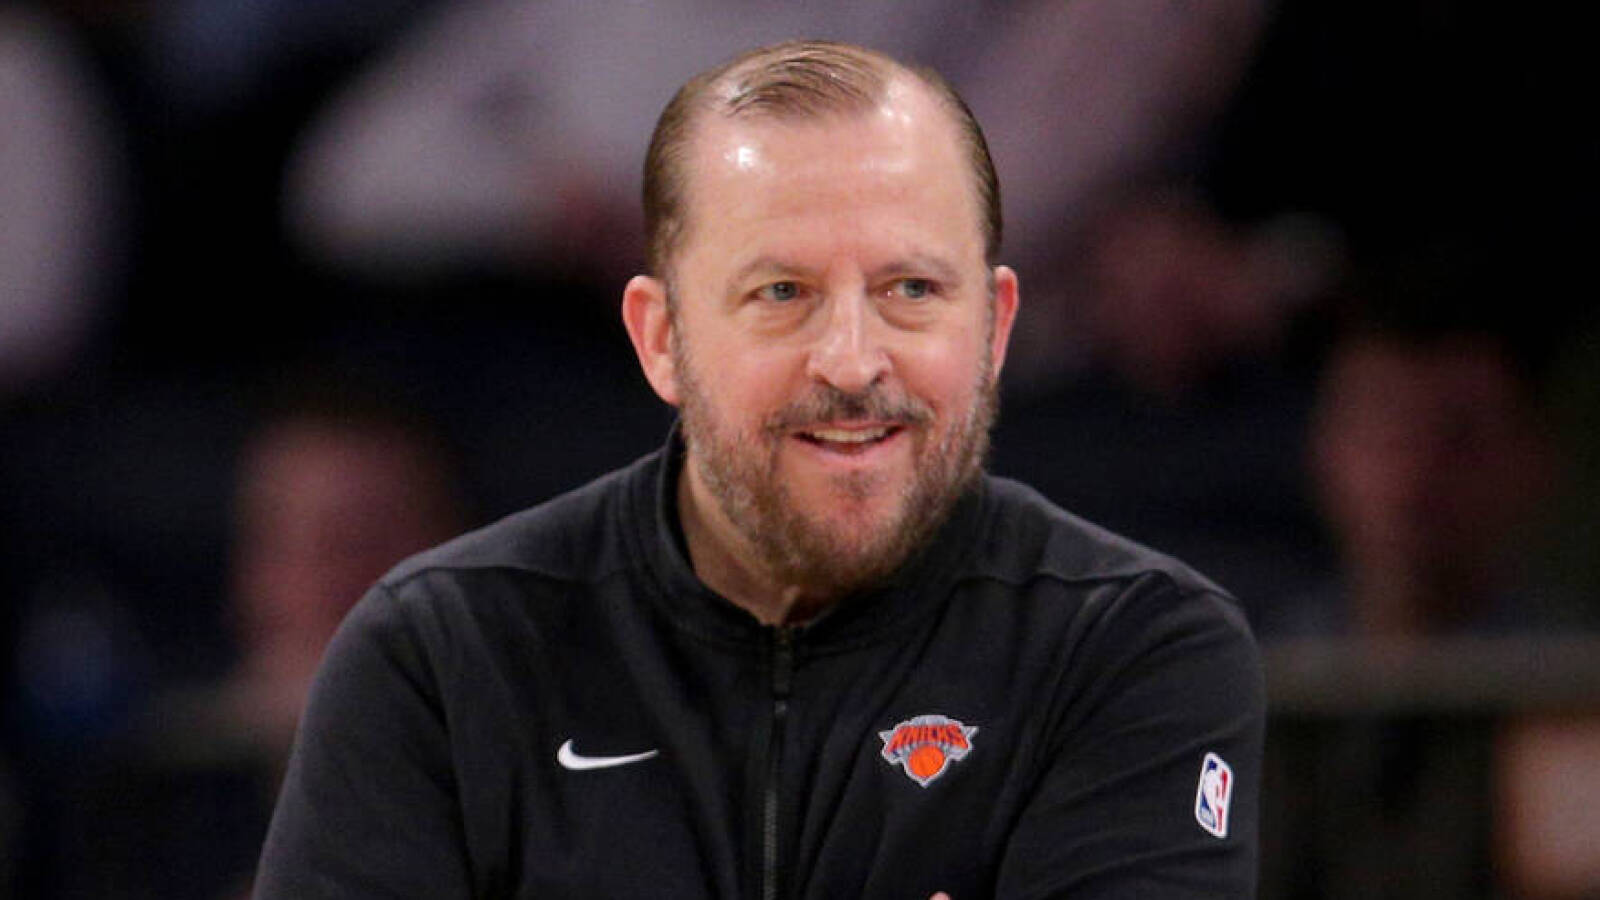 Knicks trade target believes he's 'the type of player' HC Tom Thibodeau likes